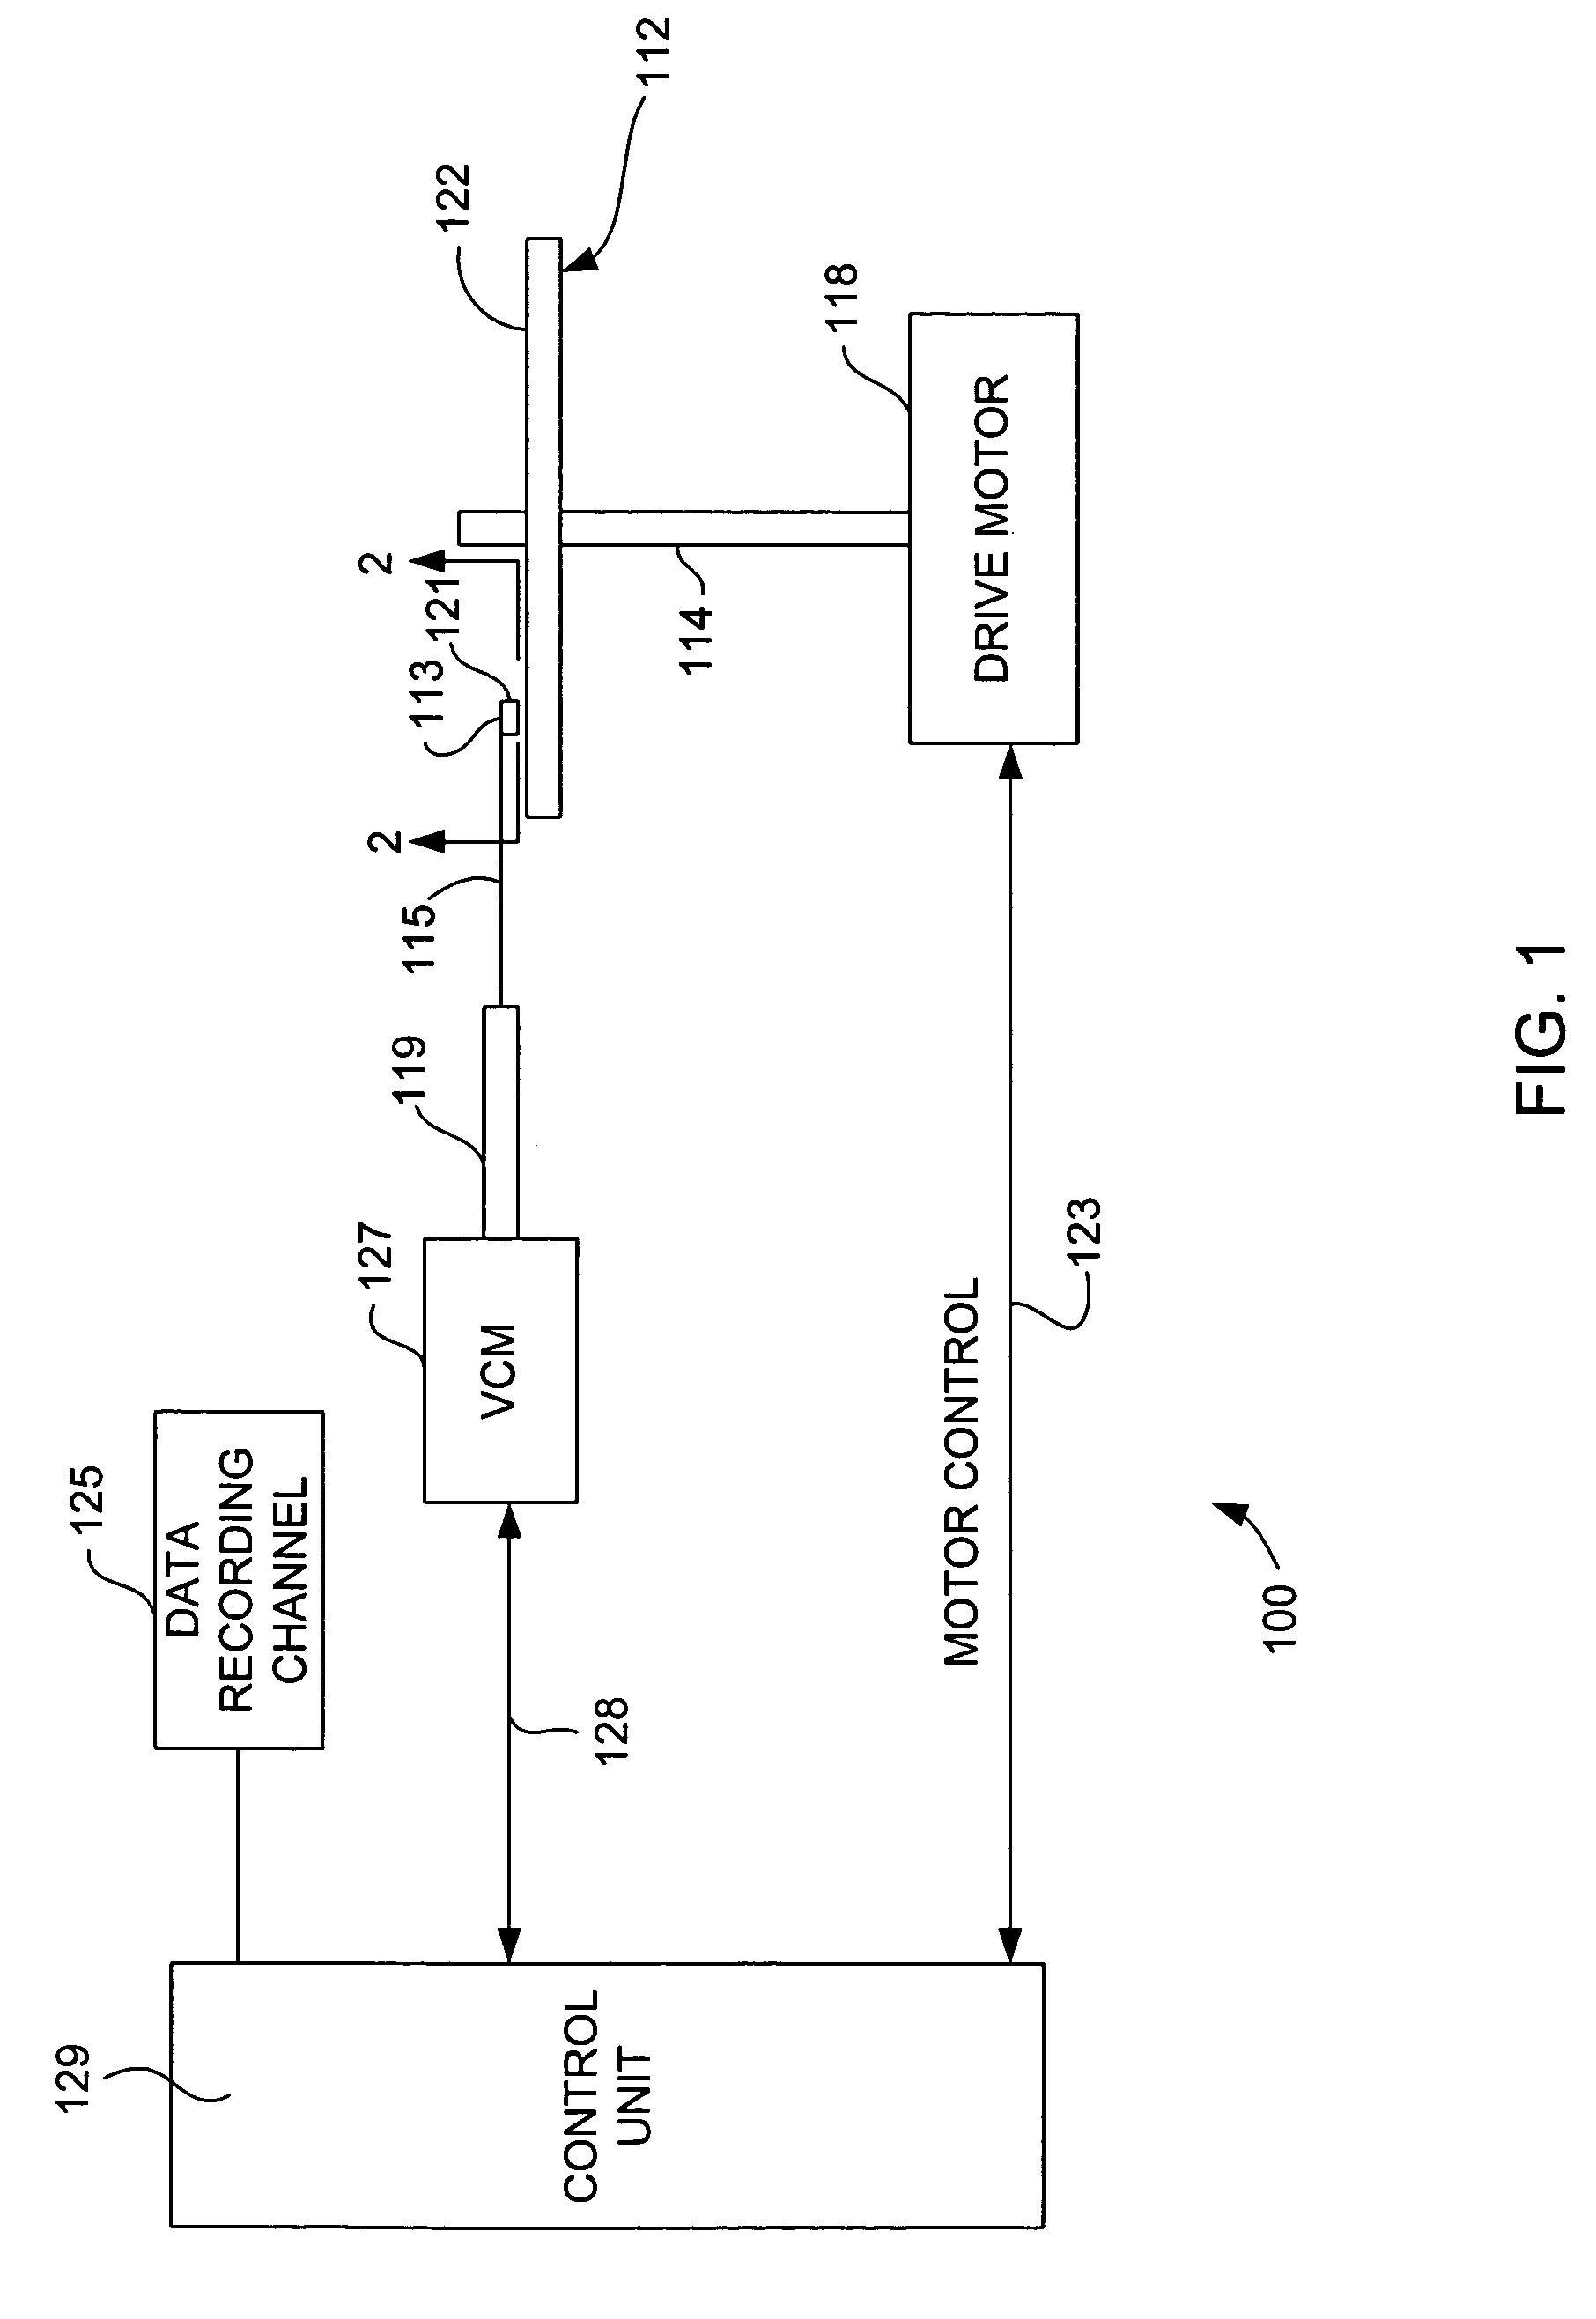 Lower saturation field structure for perpendicular AFC pole